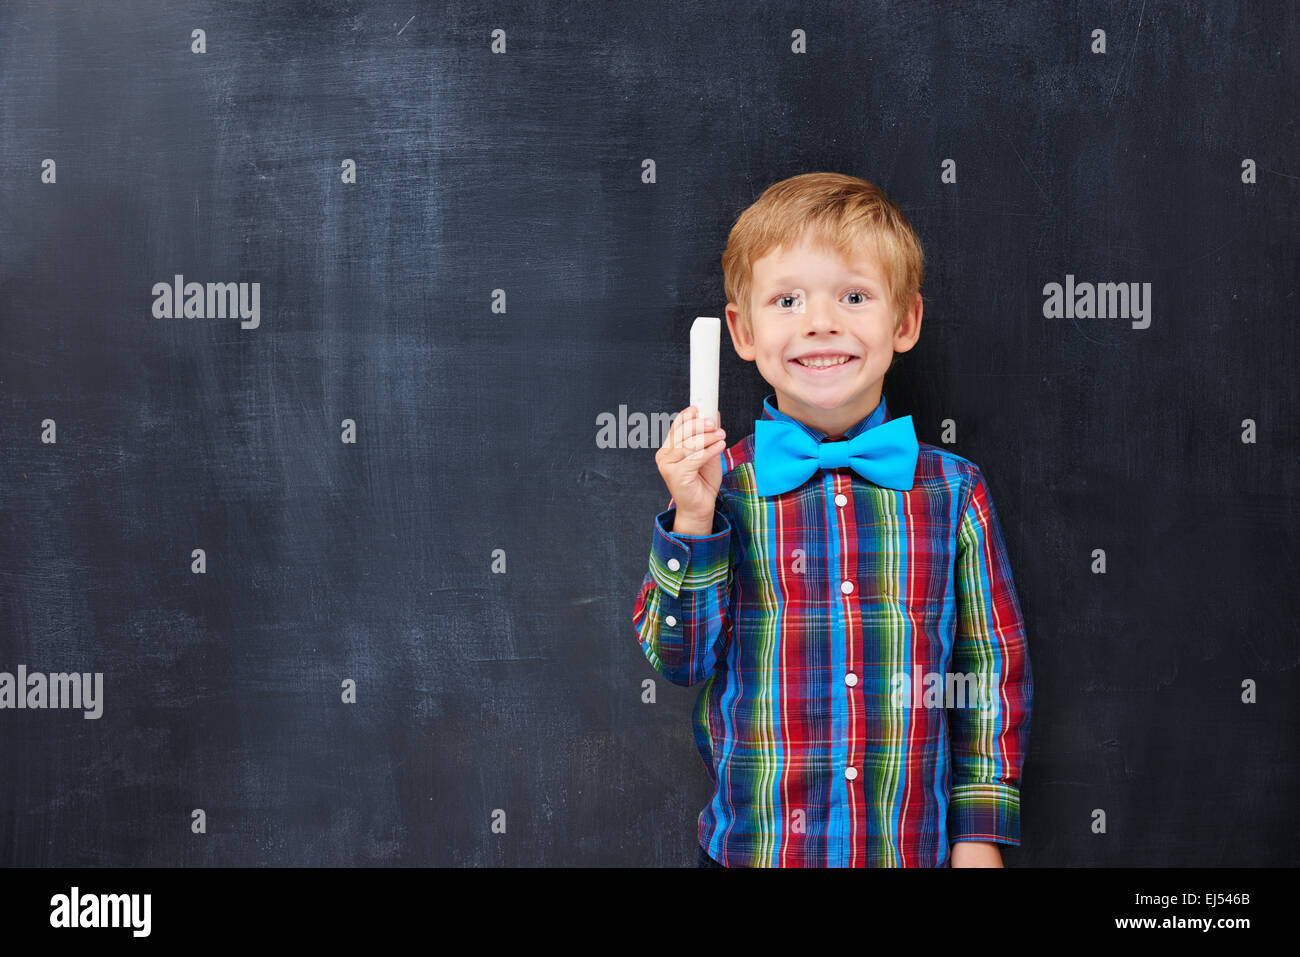 Boy with red hair looking forward far classwork Stock Photo